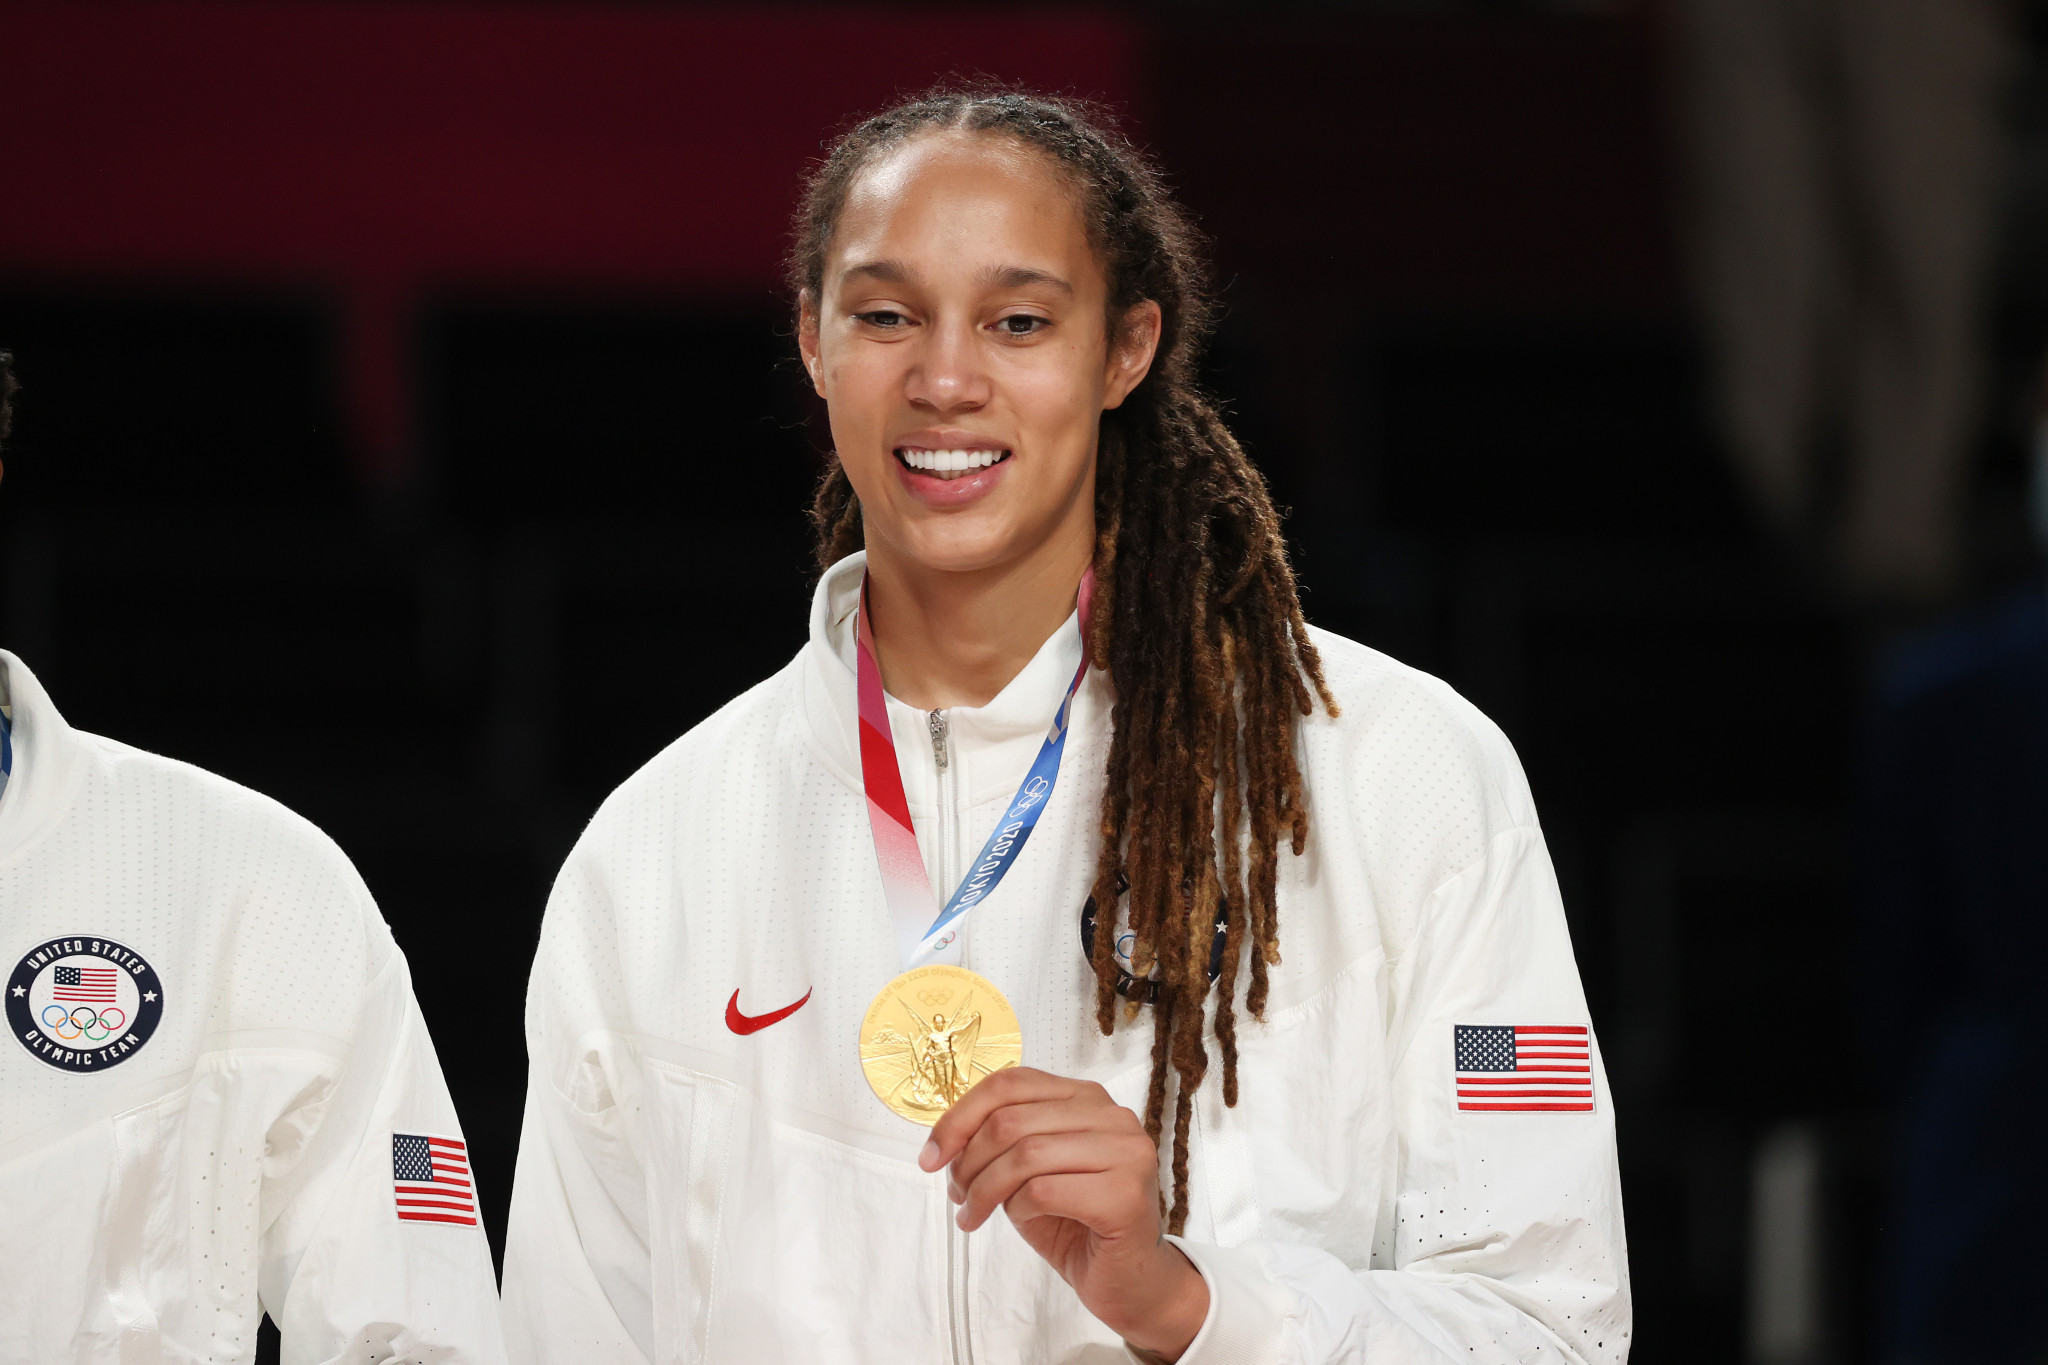 Brittney Griner has won two Olympic gold medals ©Getty Images